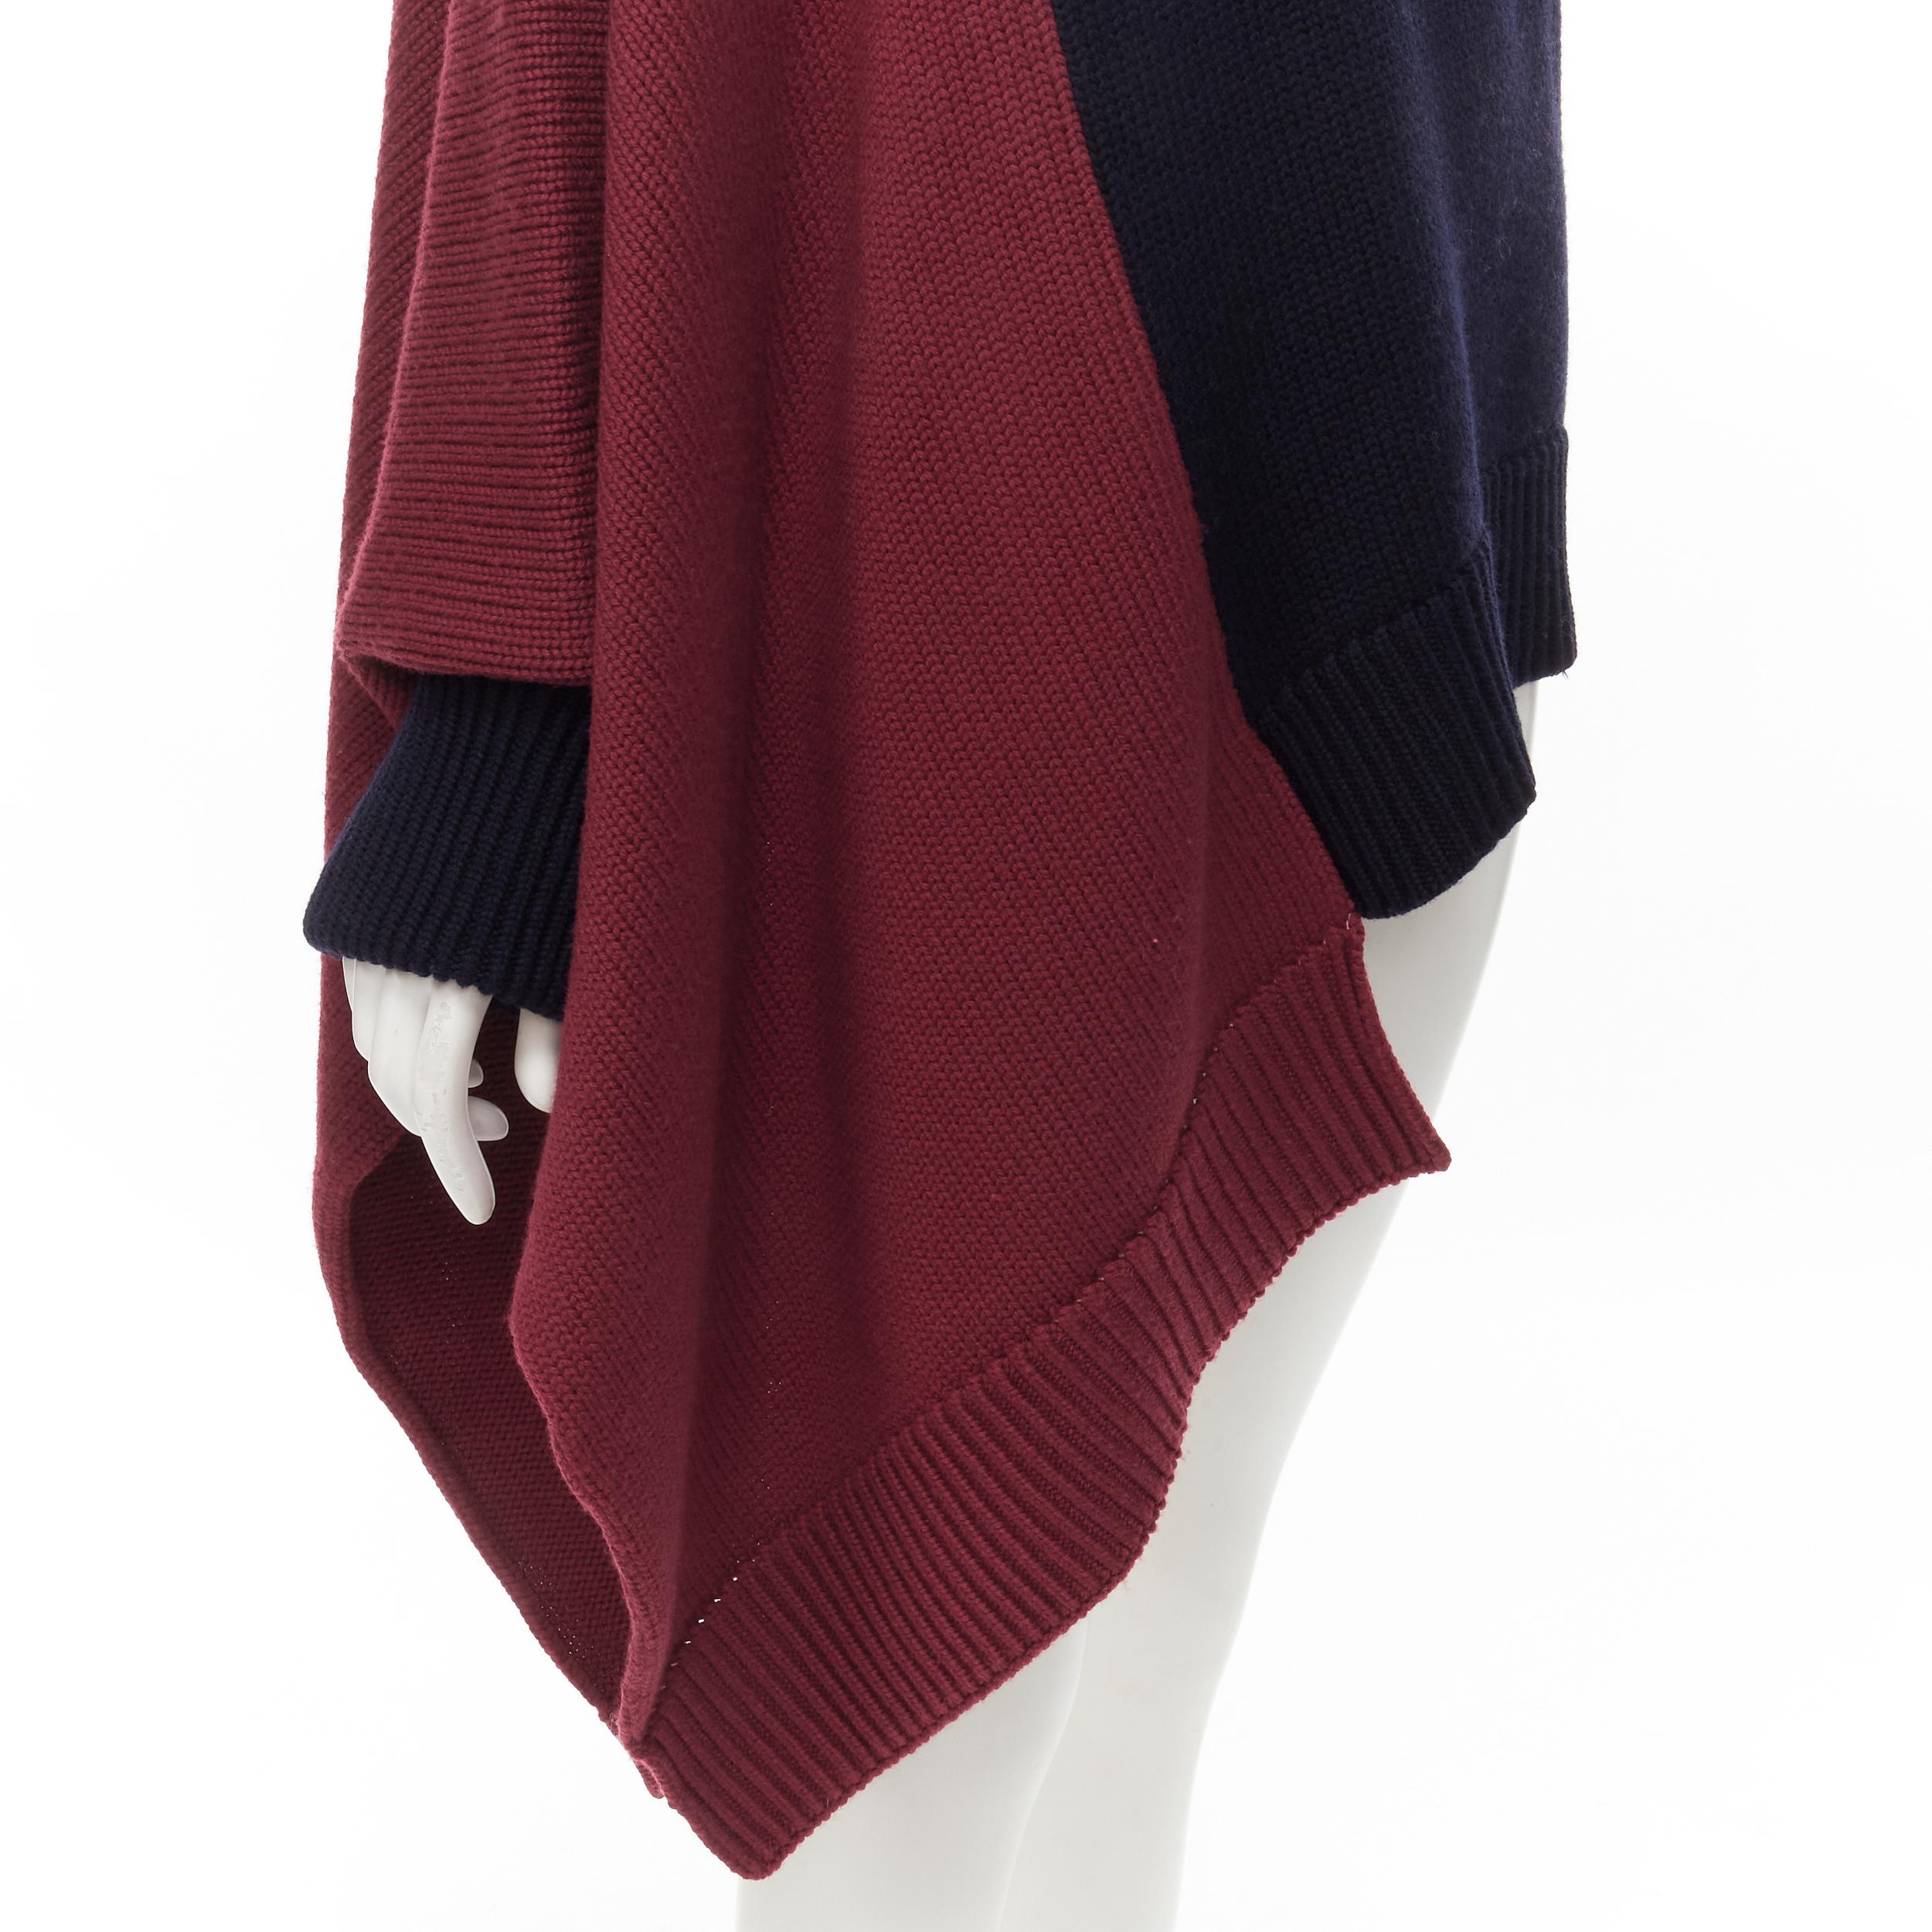 new MONSE 100% extra fine merino wool navy burgundy bias sweater cape pocho XS
Brand: Monse
Material: Merino Wool
Color: Navy
Pattern: Solid
Extra Detail: Rolled turtleneck. Deconstructed asymmetric draped sweater.
Made in: United